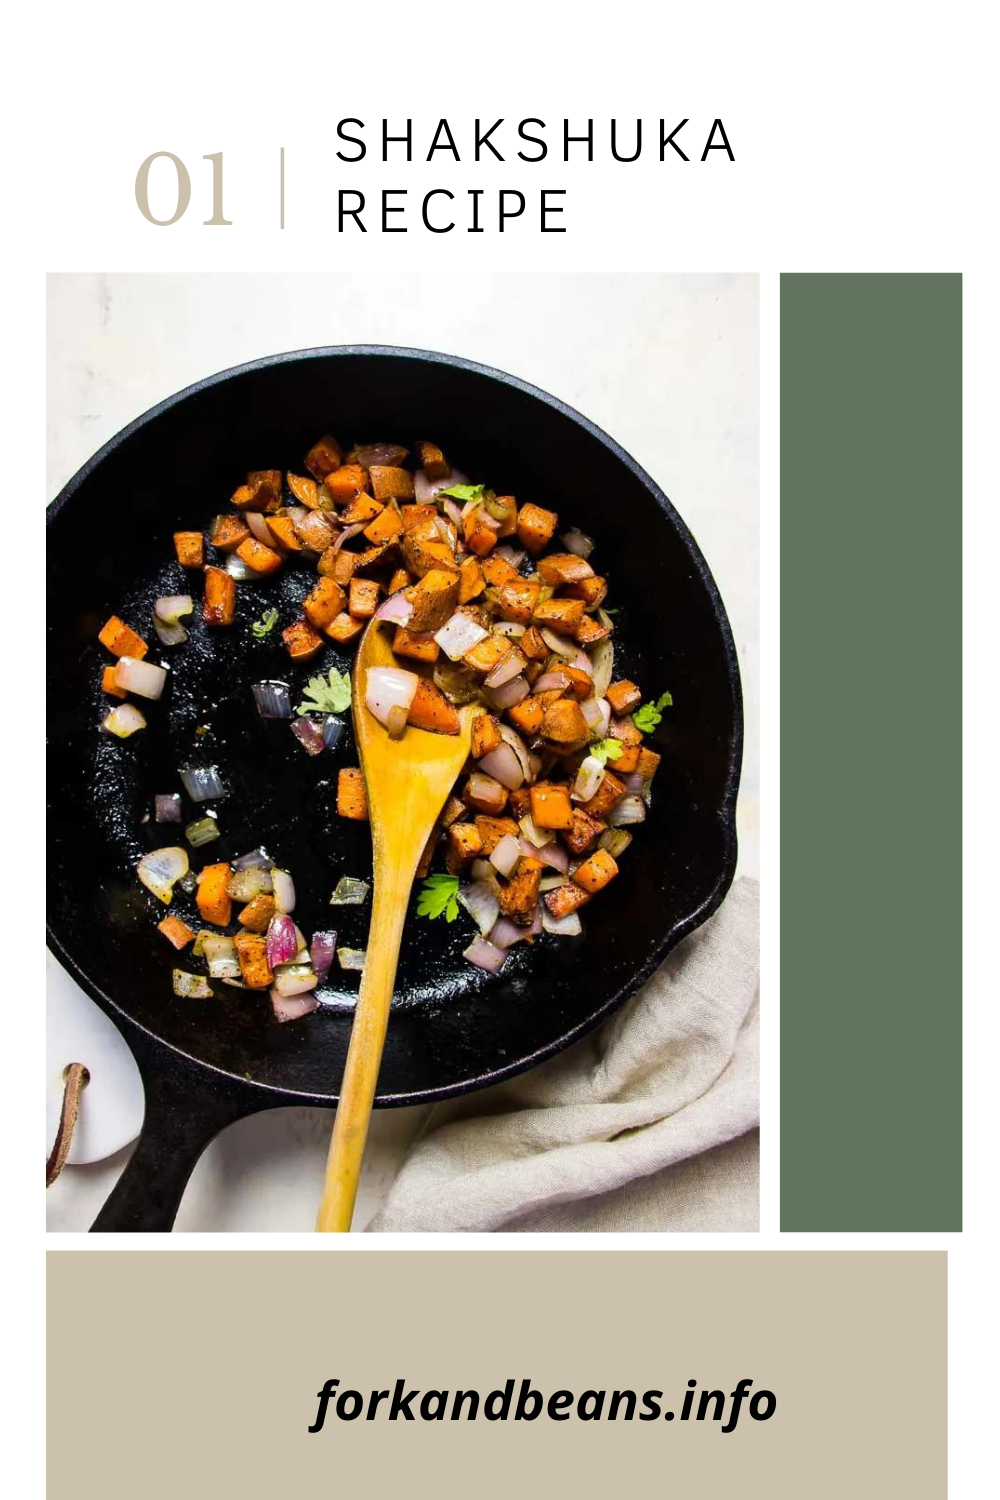 Hash with sweet potatoes from Mexico with spinach and black beans